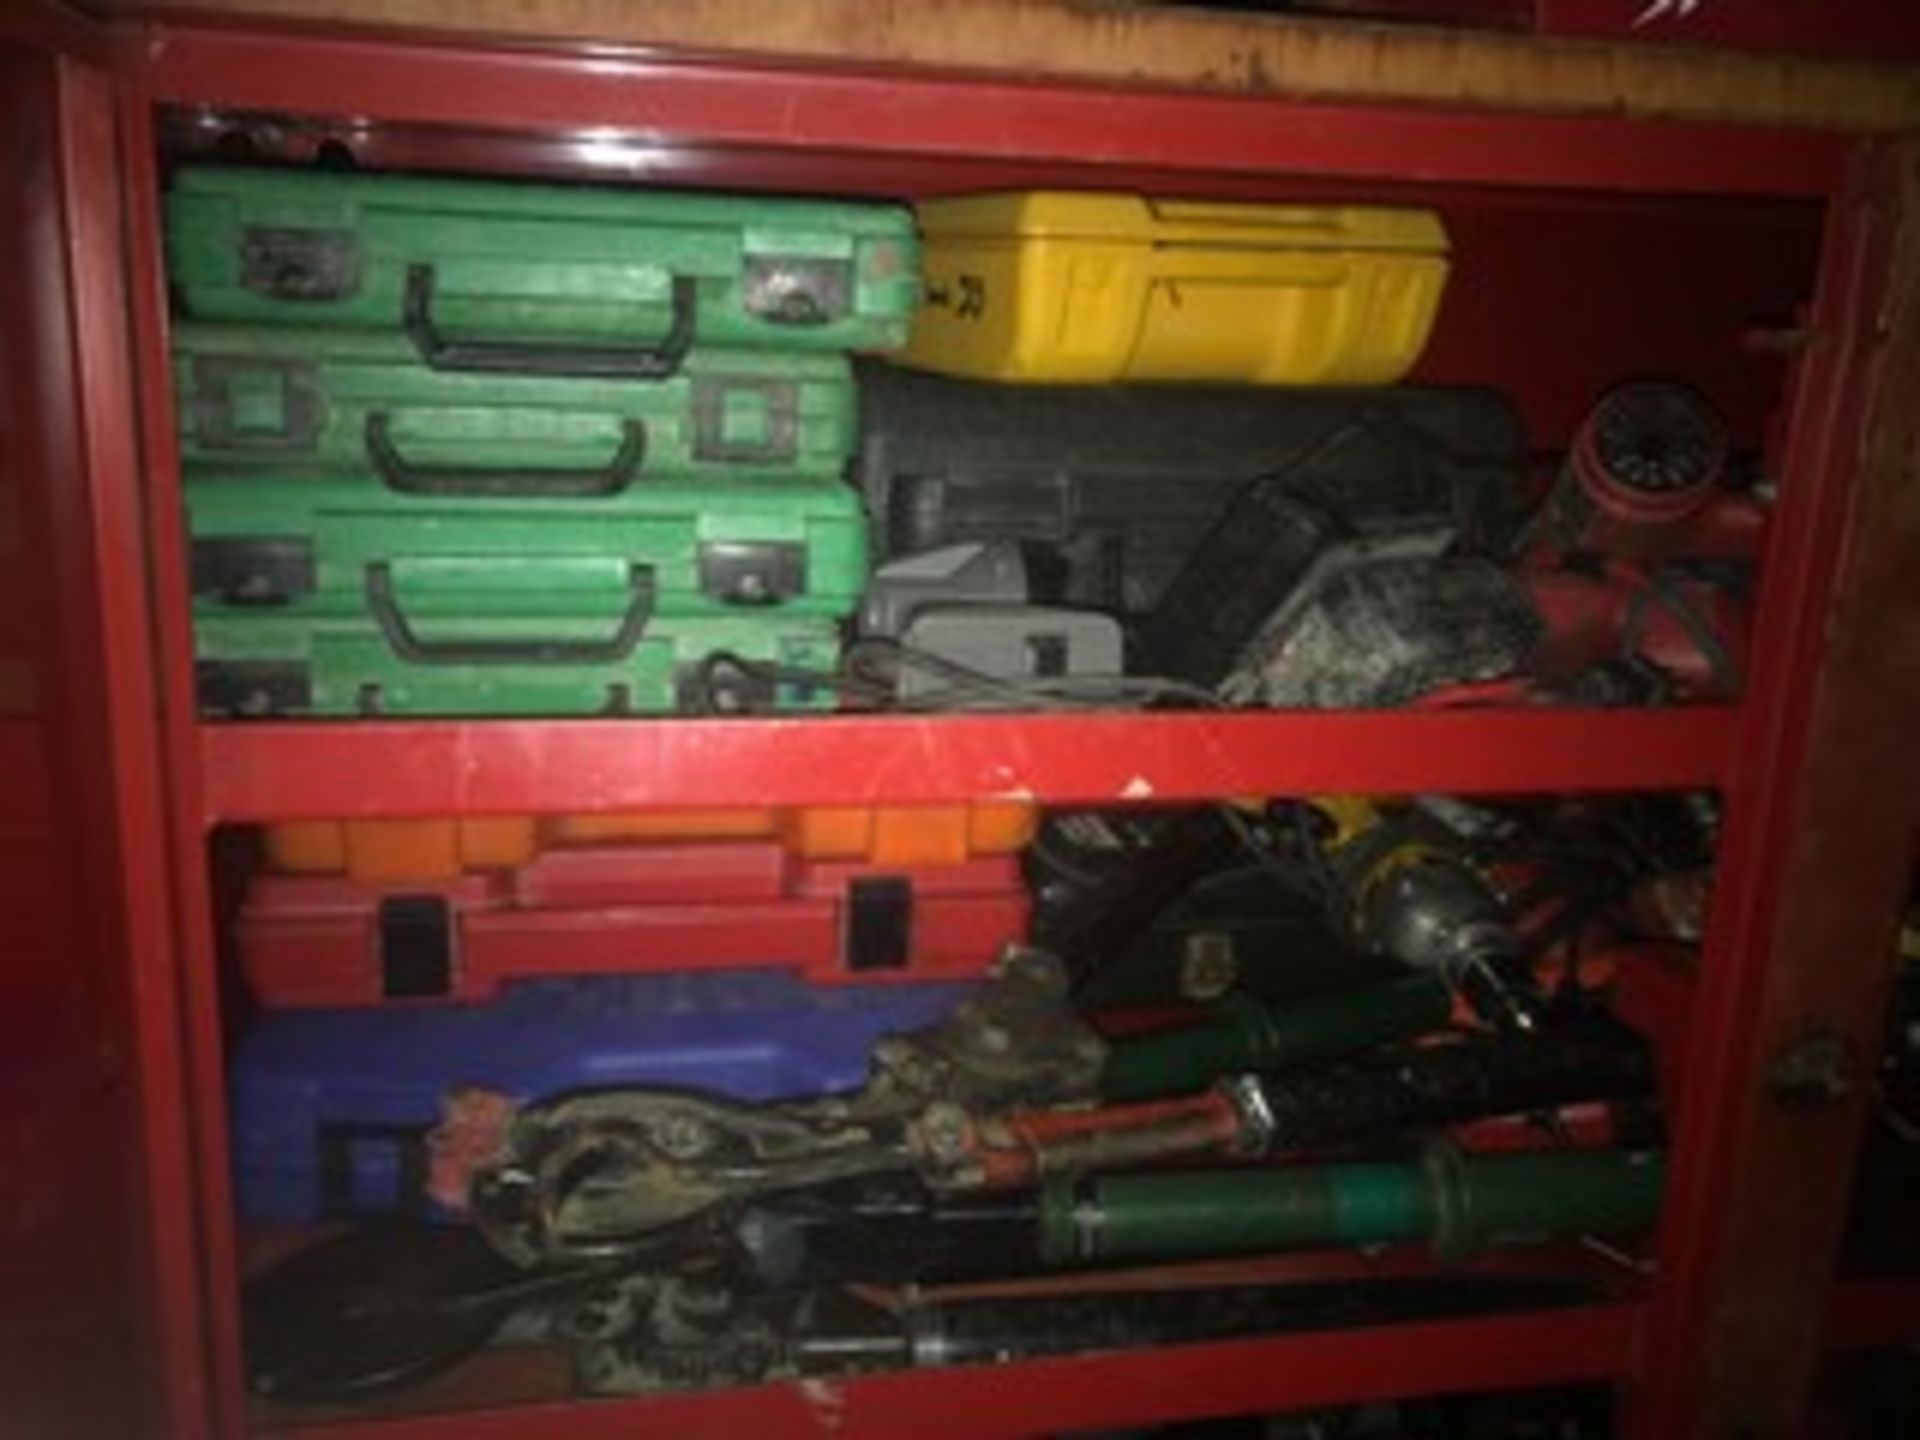 2-DOOR GB JOB BOX WITH CONTENTS -RATCHETING KNOCKOUT SETS, HILTI & RAMSET POWDER FASTENING GUNS - Image 3 of 6